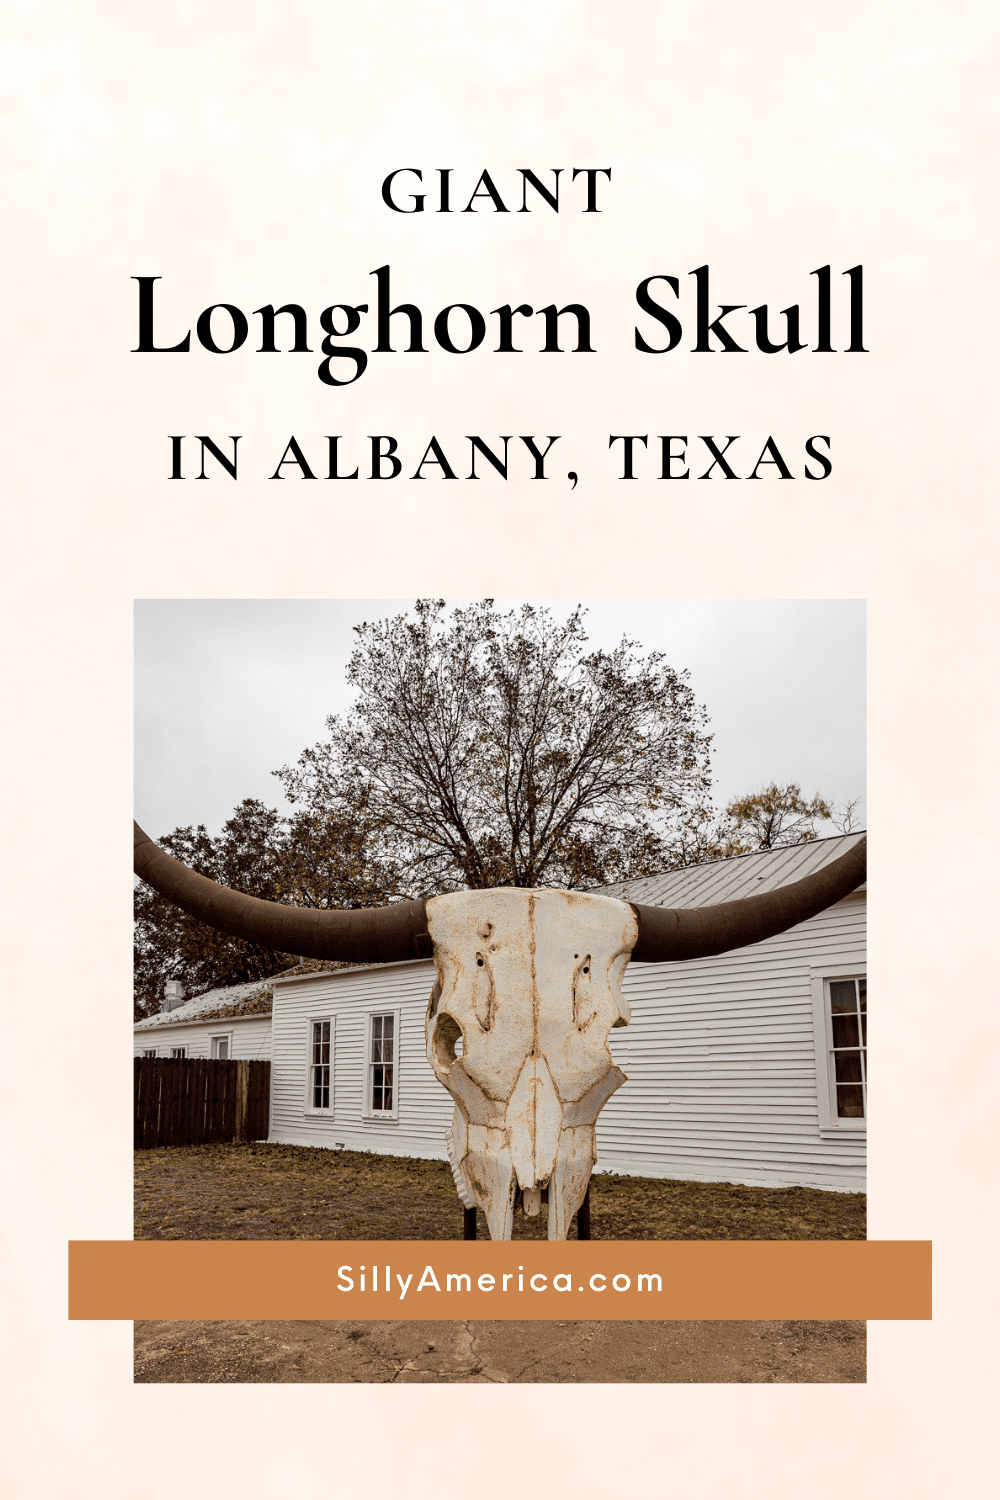 Taking a road trip and looking for the best roadside attractions in Texas? Find this Giant Longhorn Skull in Albany, Texas. The sculpture was created by Albany artist Joe Barrington of Red Star Studio. He is also behind other big skulls in Abilene and Throckmorton, along with numerous other sculptures of birds, horseshoes, and more that you'll find around Texas. #RoadsideAttraction #RoadsideAttractions #LonghornSkull